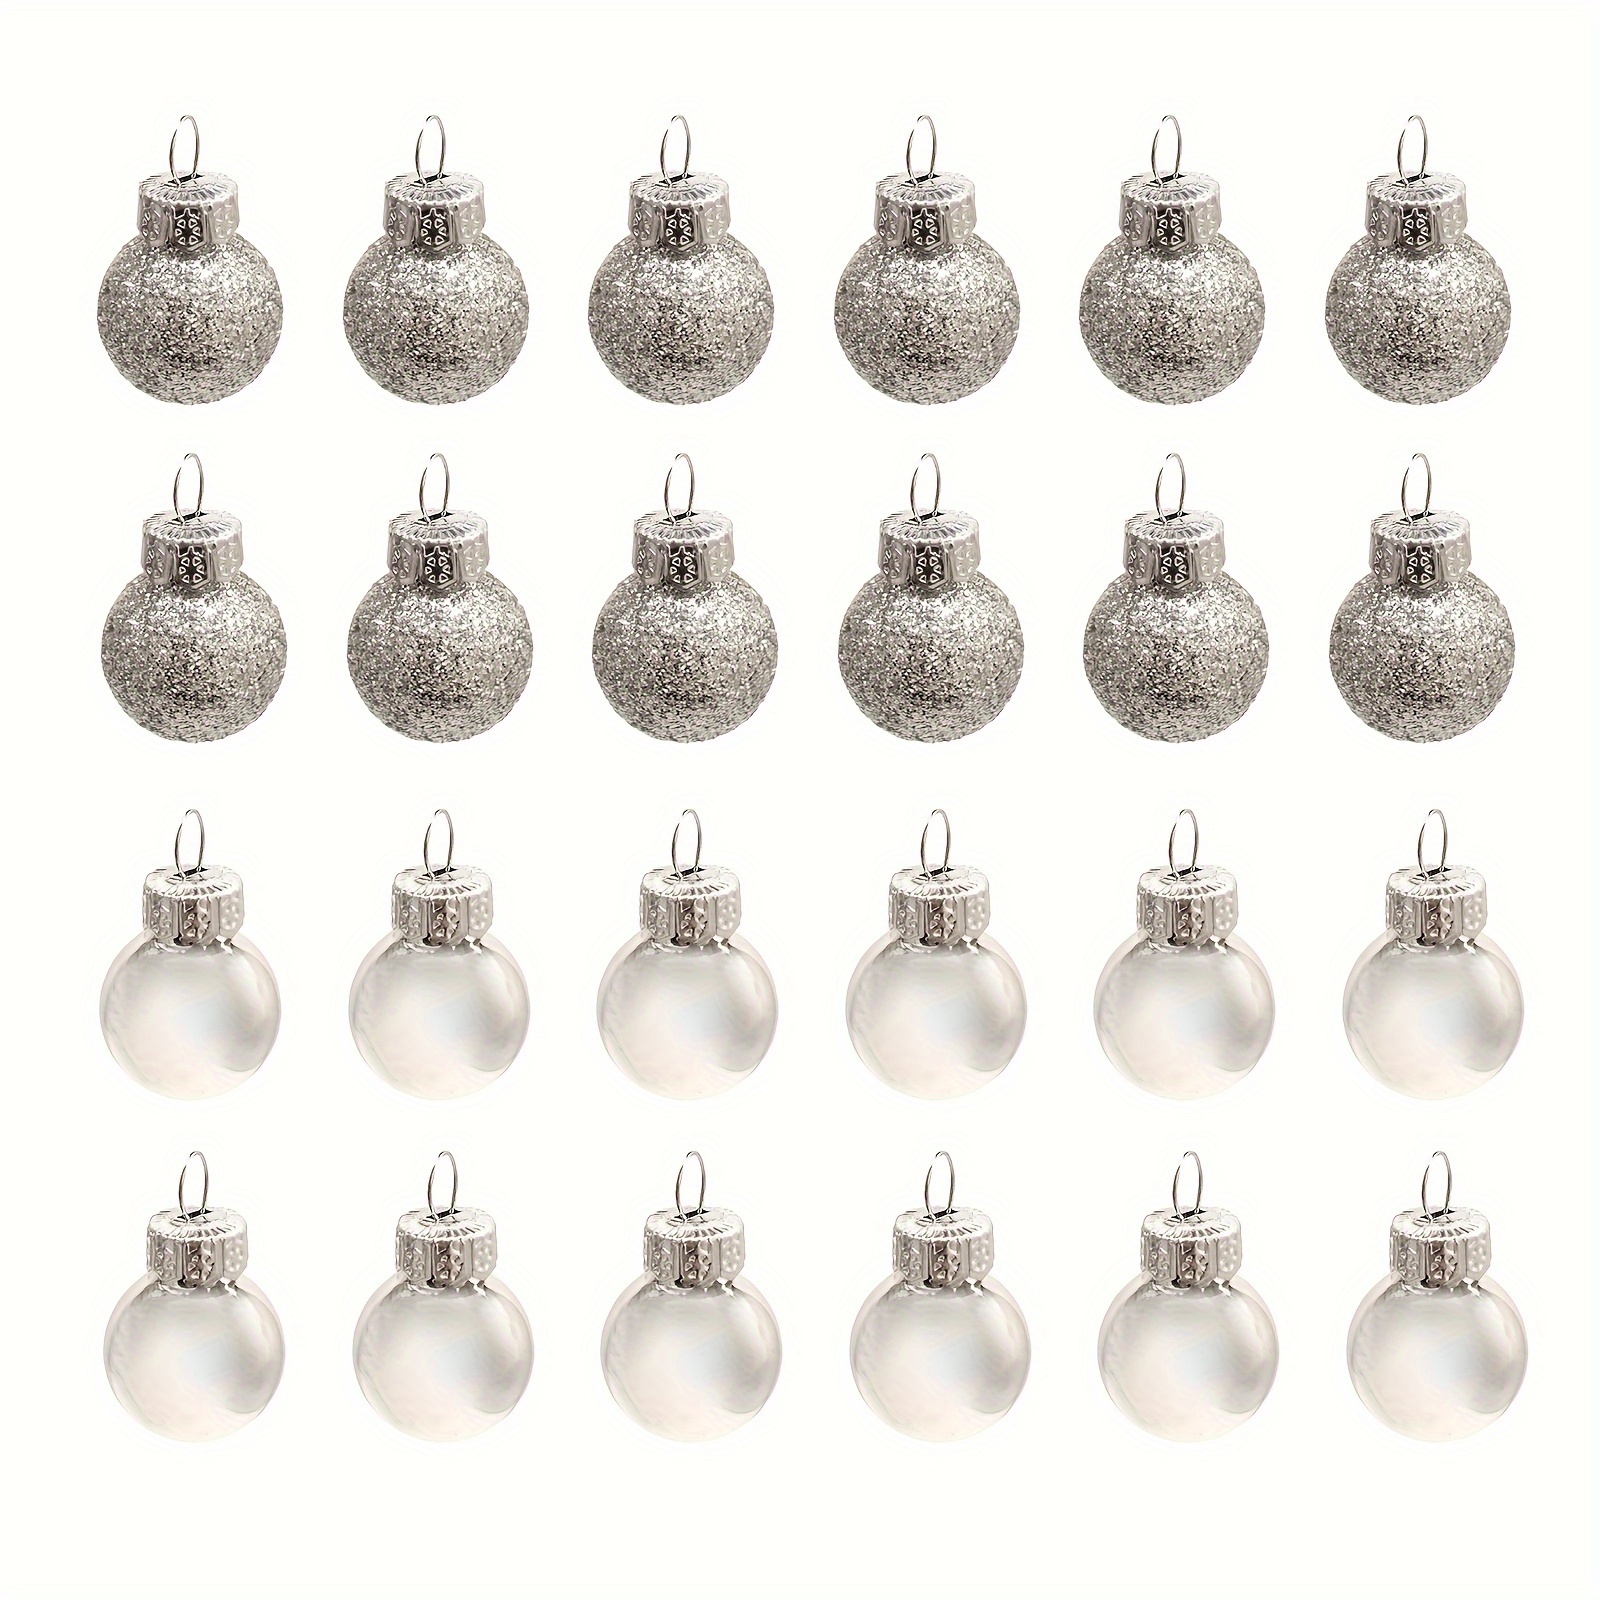 24 Pcs Christmas Balls Ornaments for Xmas Tree - Shatterproof Christmas Tree Decorations Small Hanging Ball 1.18 inch ,4 Style, Blue